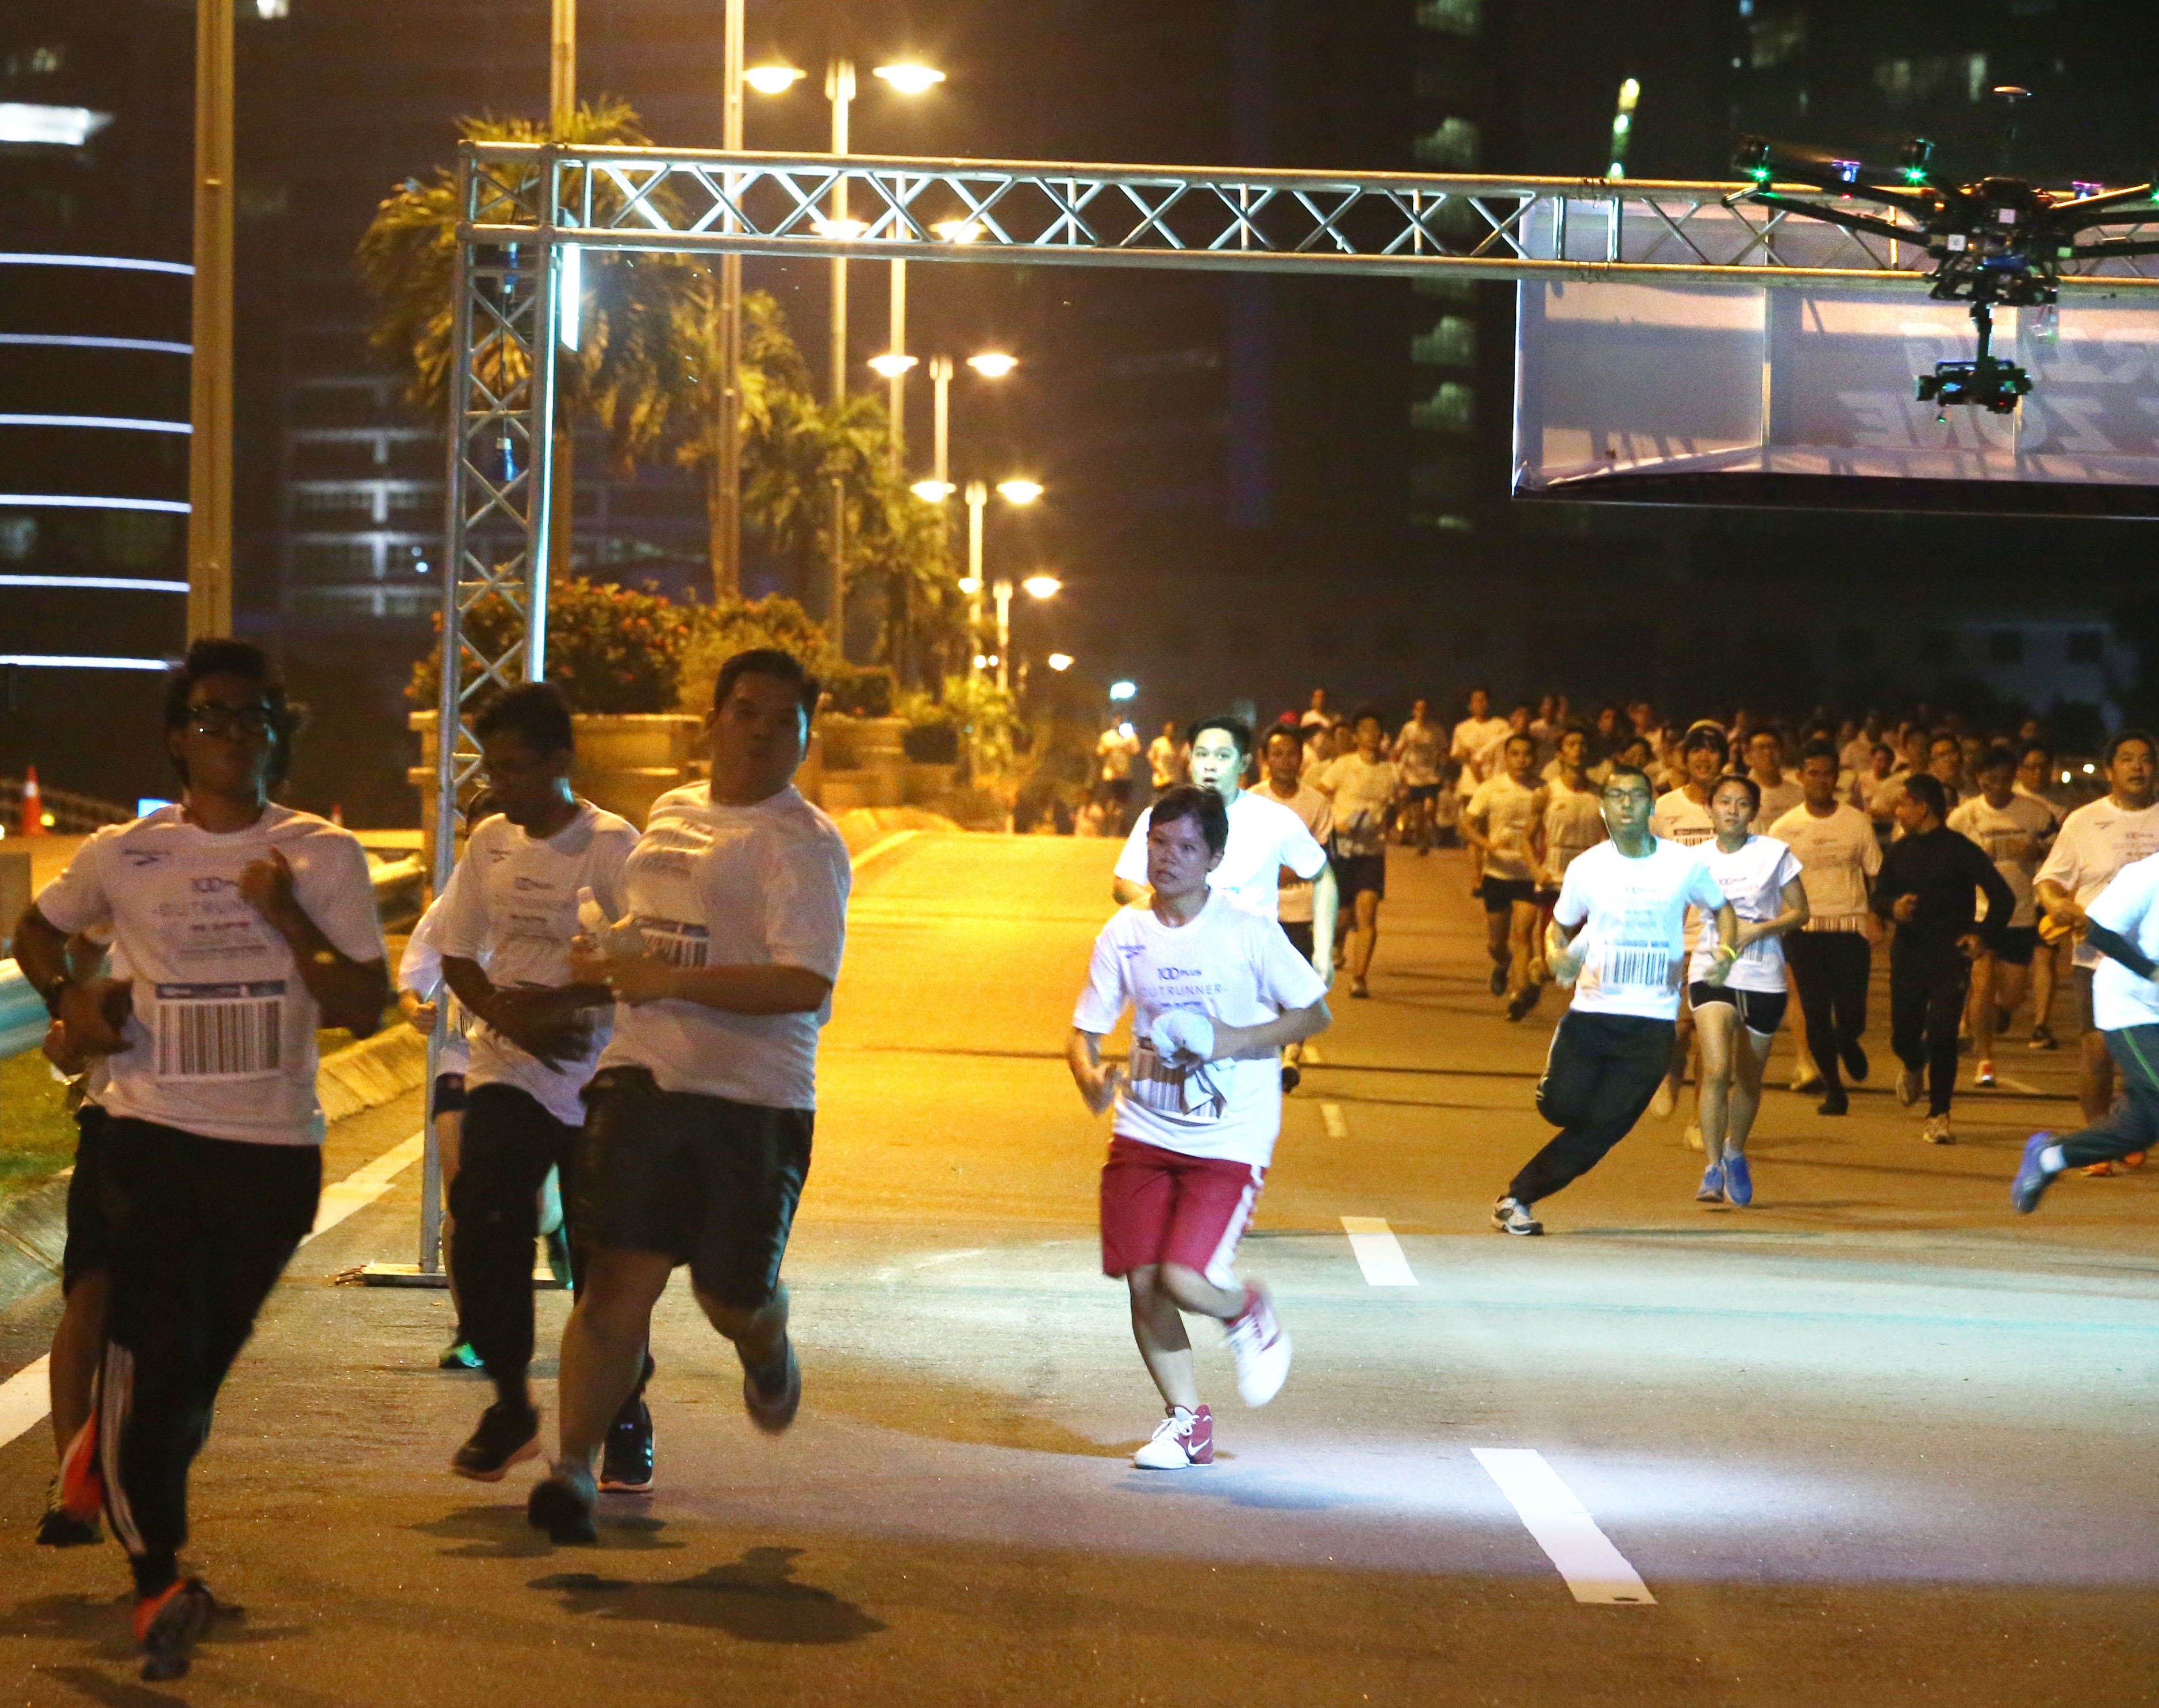 Participants in the 100PLUS Outrunner Race Against the Machines (RATM) 6km fun run avoiding a drone (top right) during the race.